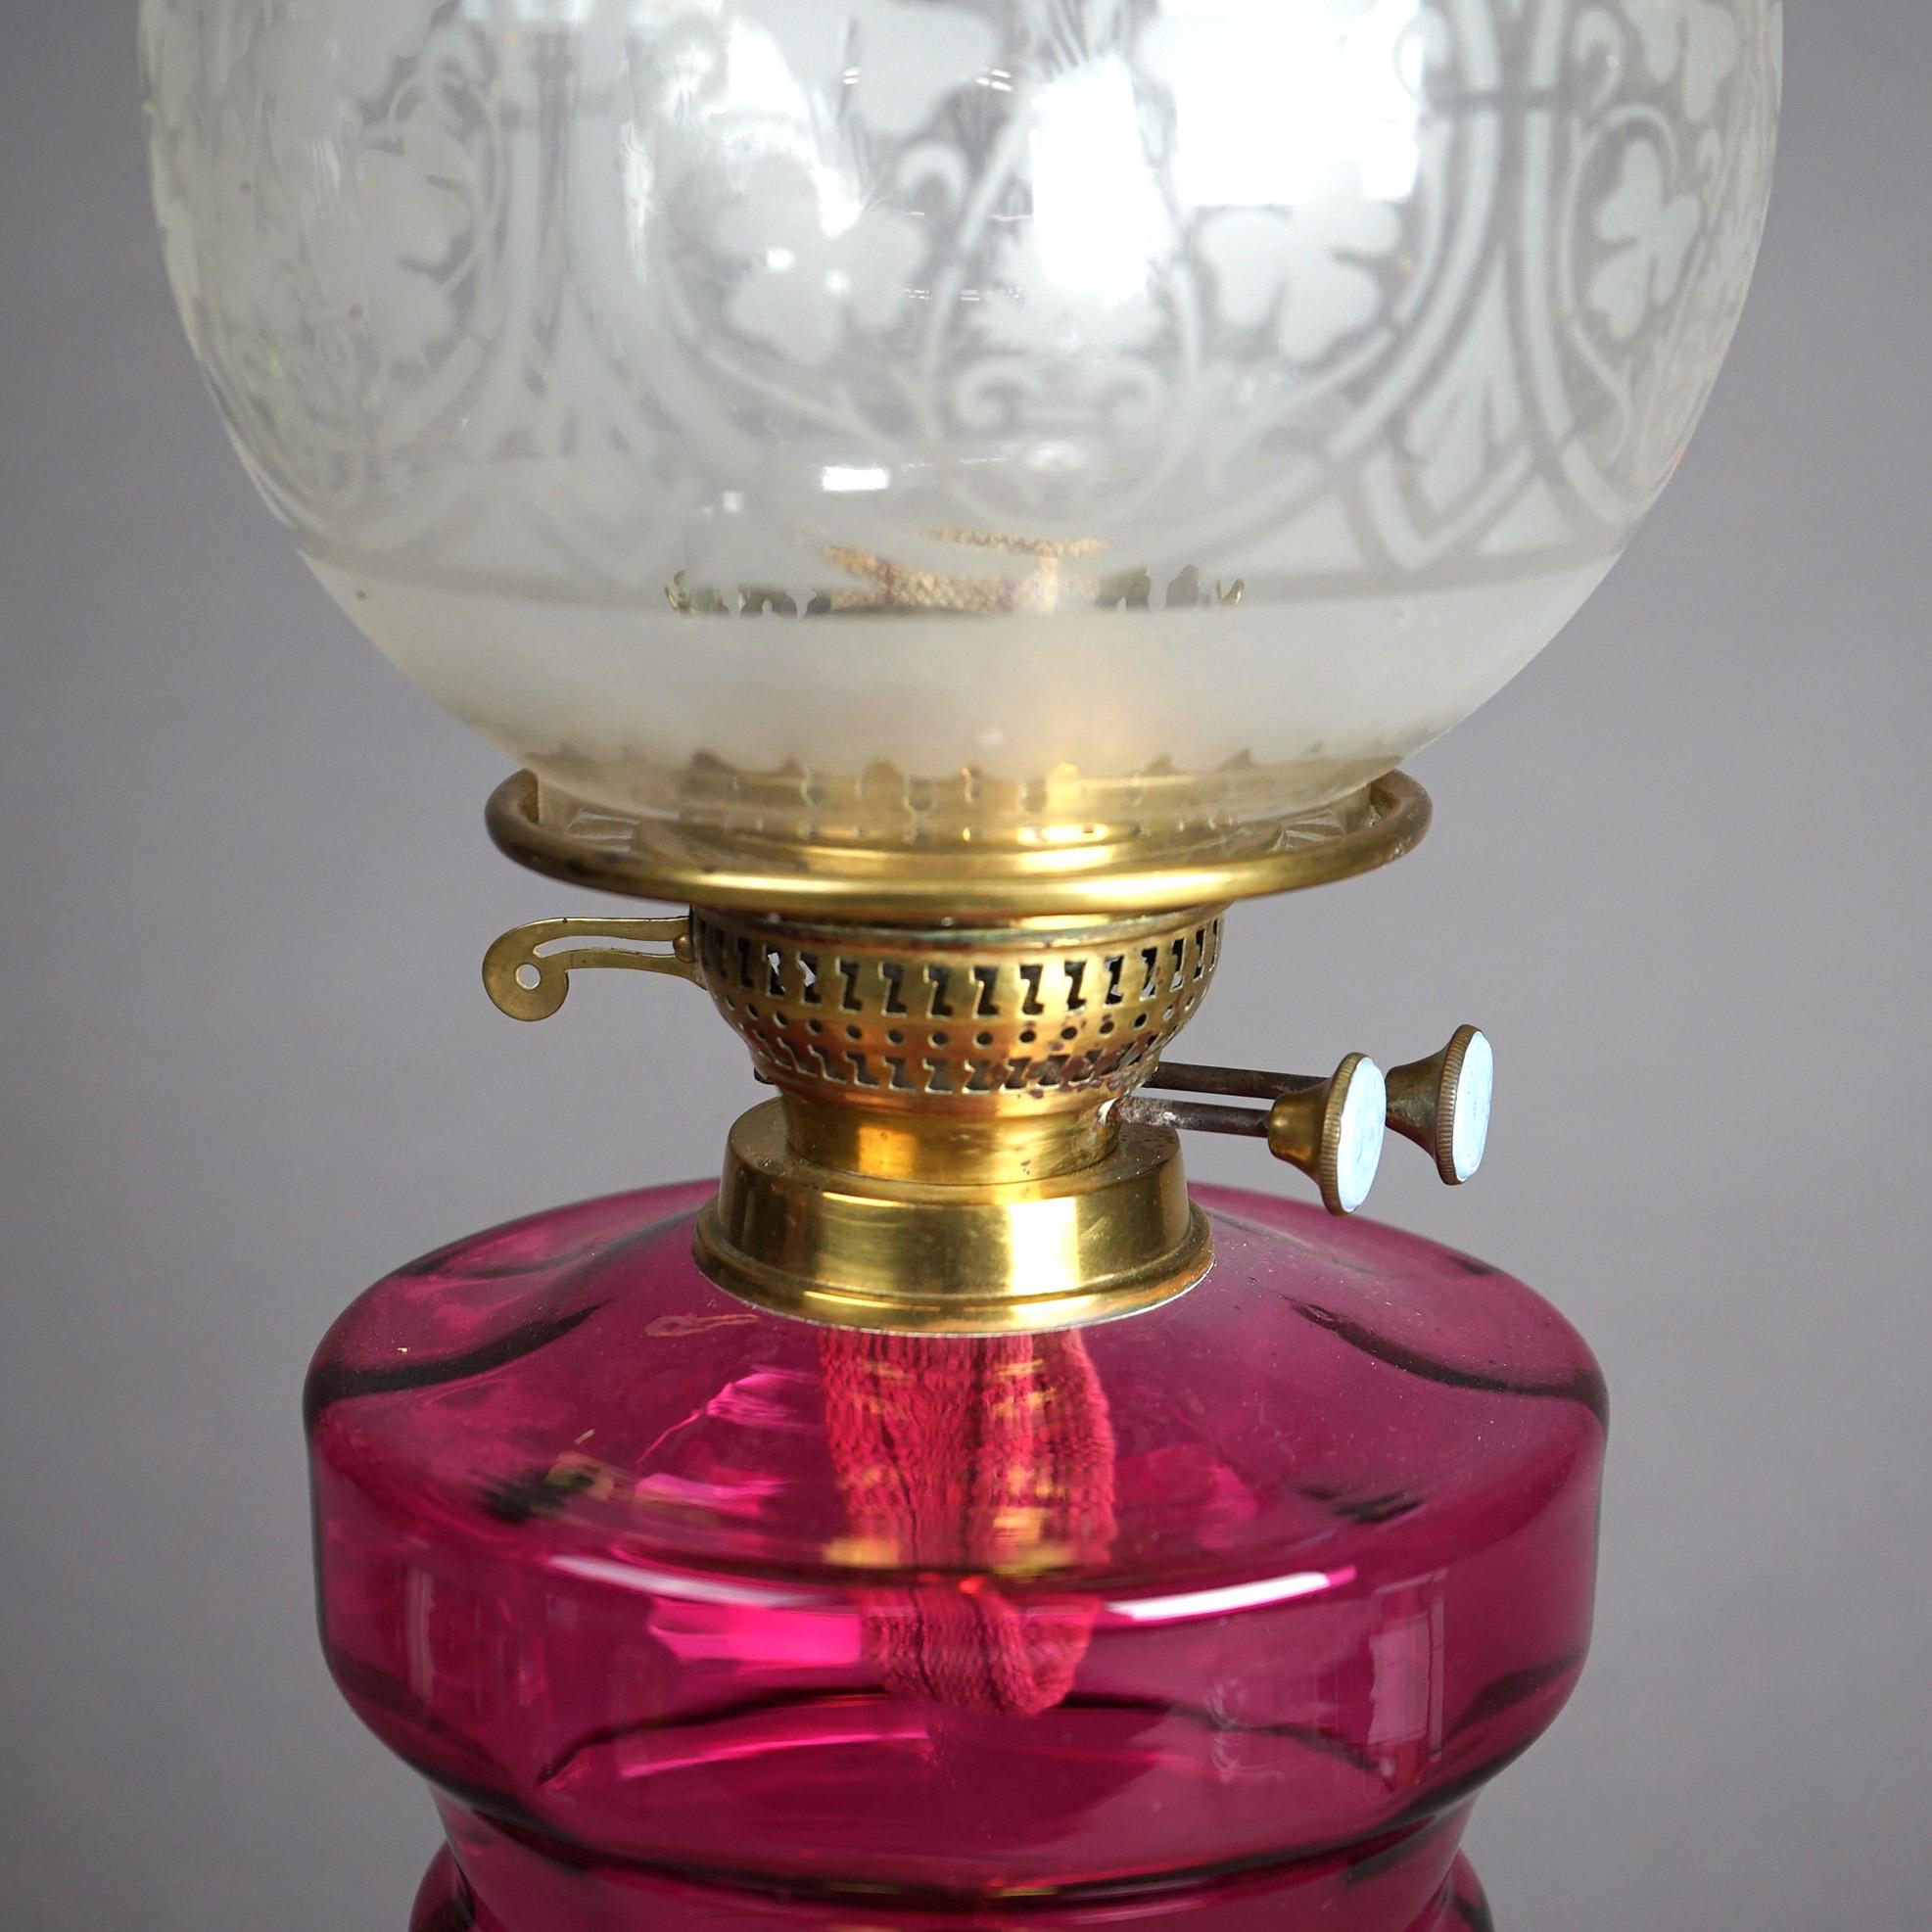 Antique Brass &Cranberry Glass “Gone With The Wind” Oil Lamp C1890 For Sale 2